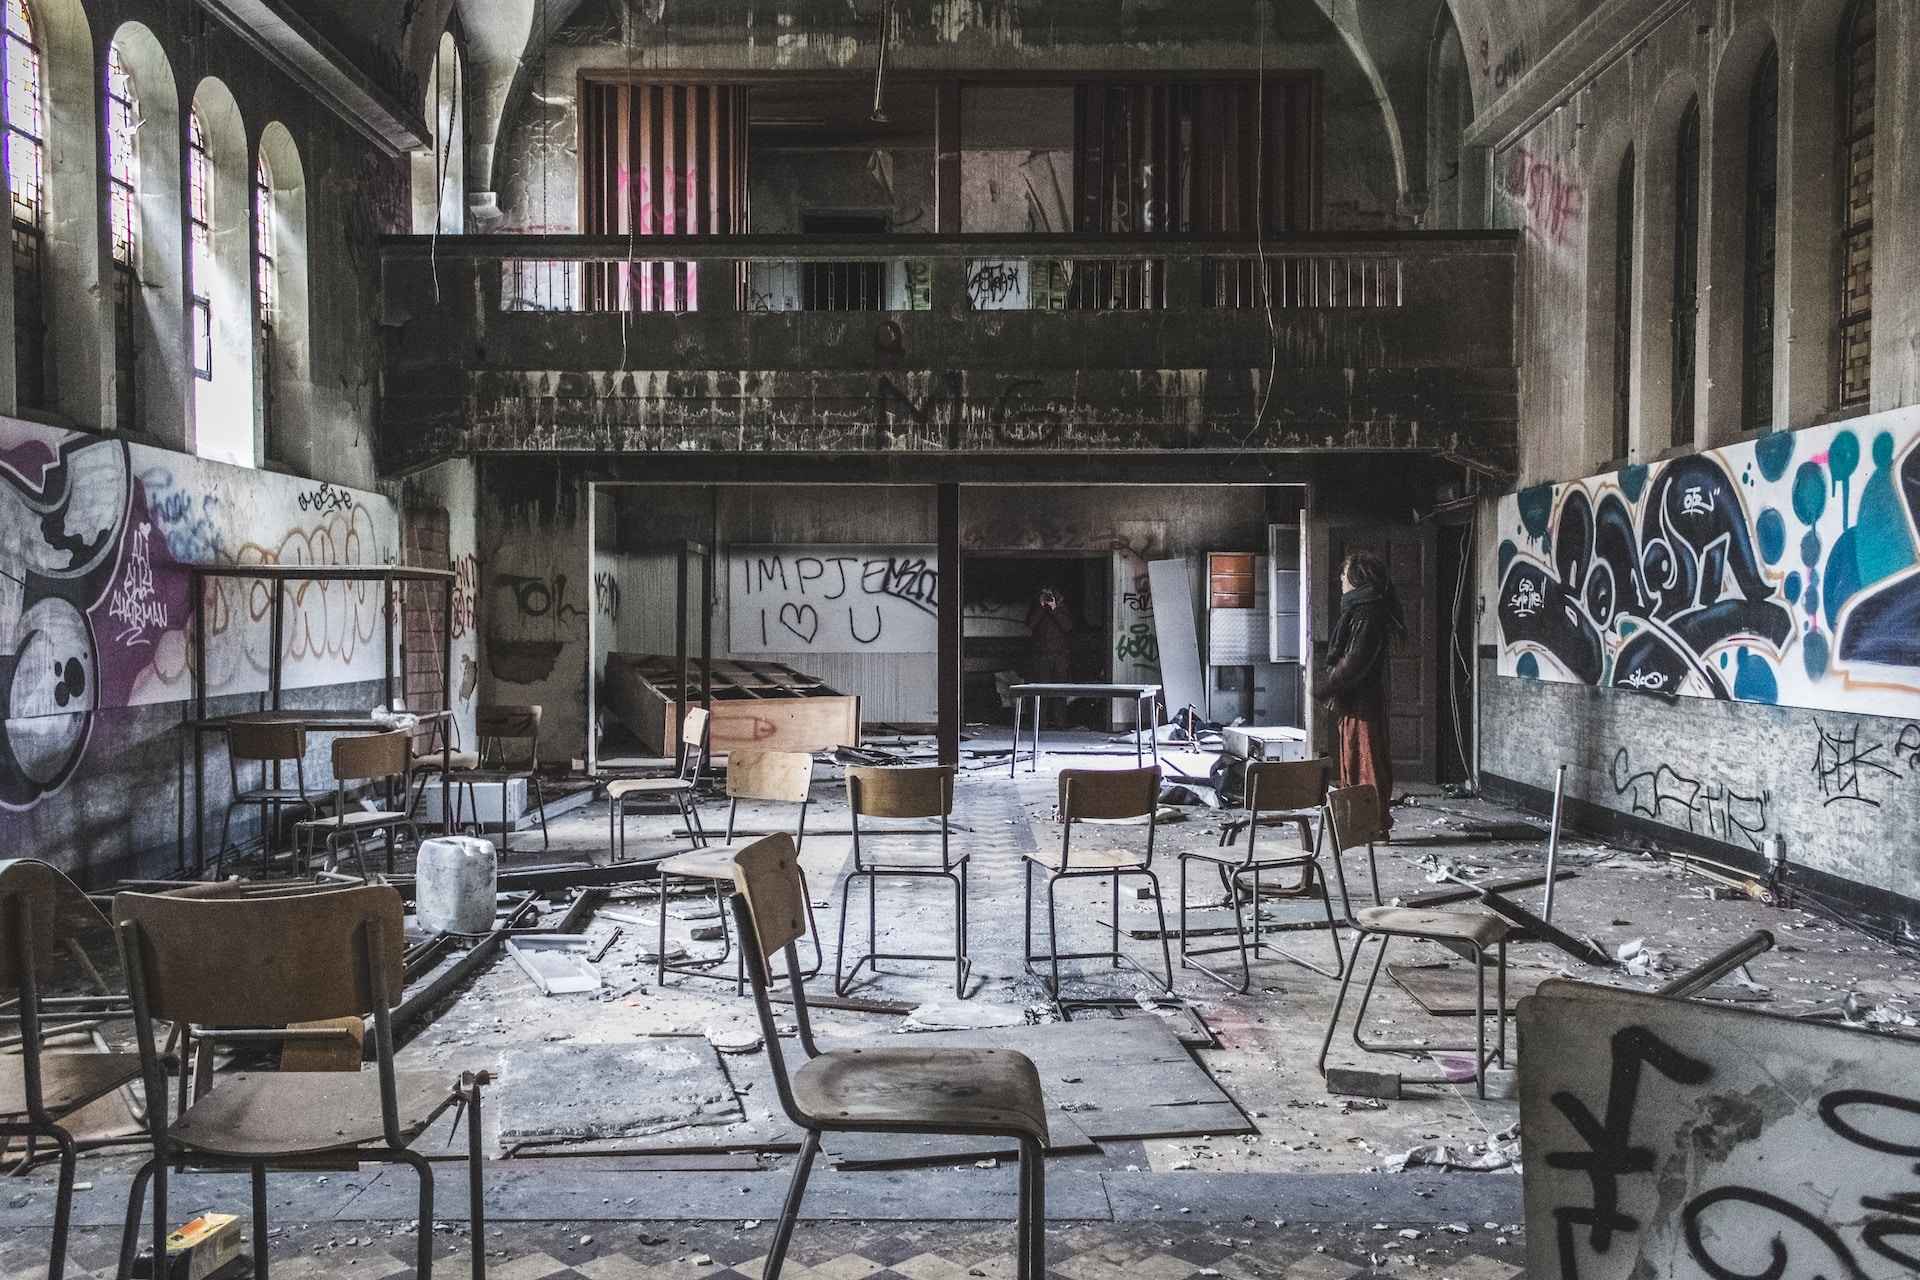 This picture was taken in a delipidated boarding school in the Belgian ghost town of Doel. Aftermath of Human Extinction on Earth